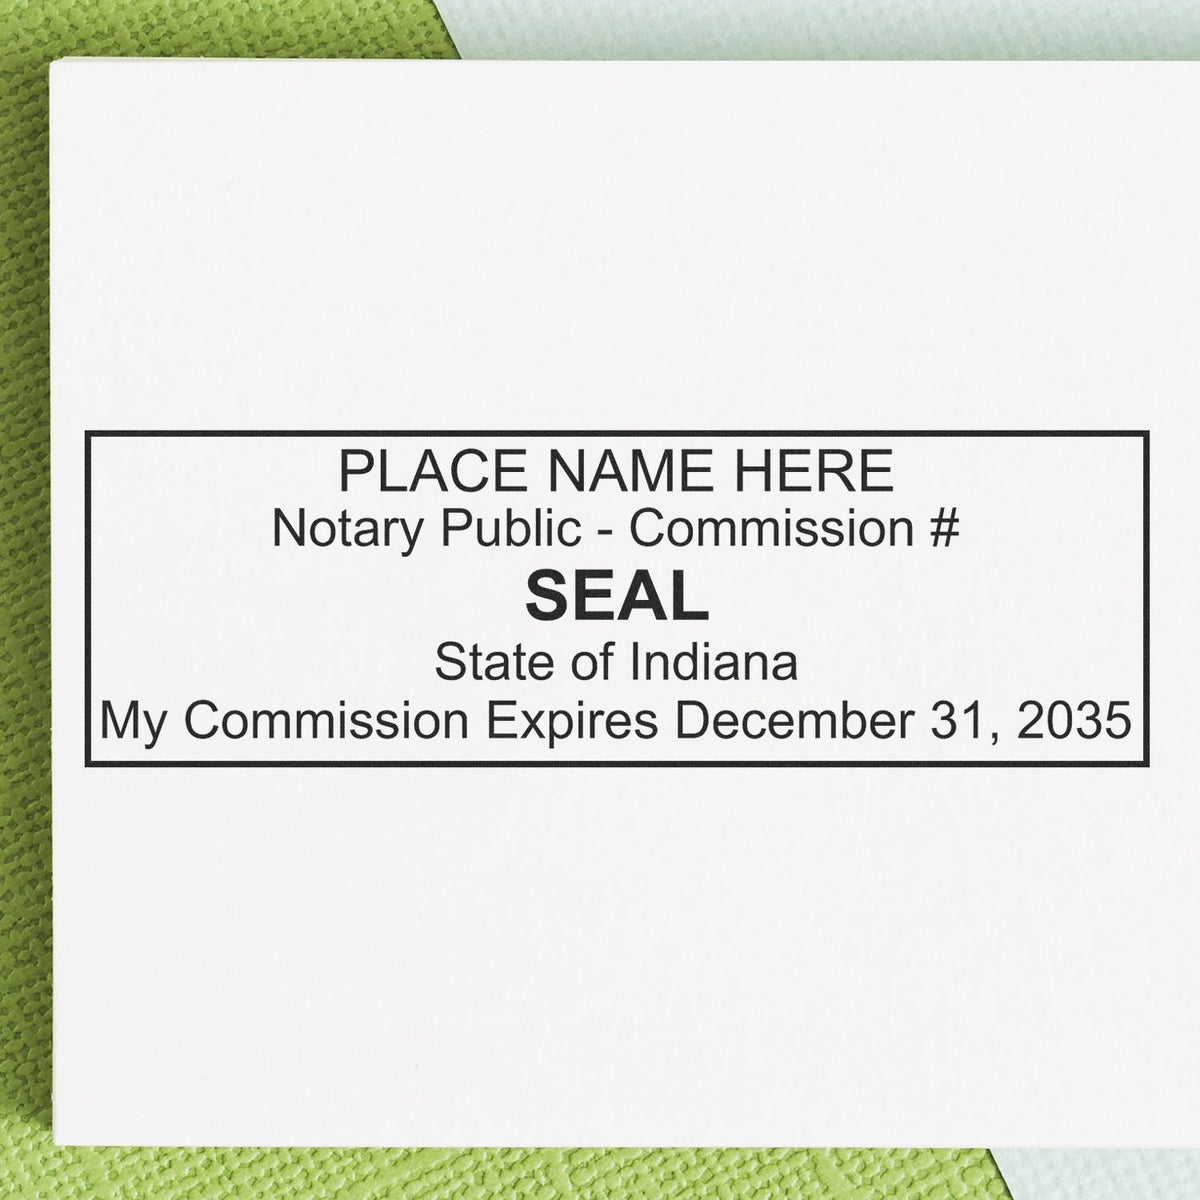 The Slim Pre-Inked Rectangular Notary Stamp for Indiana stamp impression comes to life with a crisp, detailed photo on paper - showcasing true professional quality.